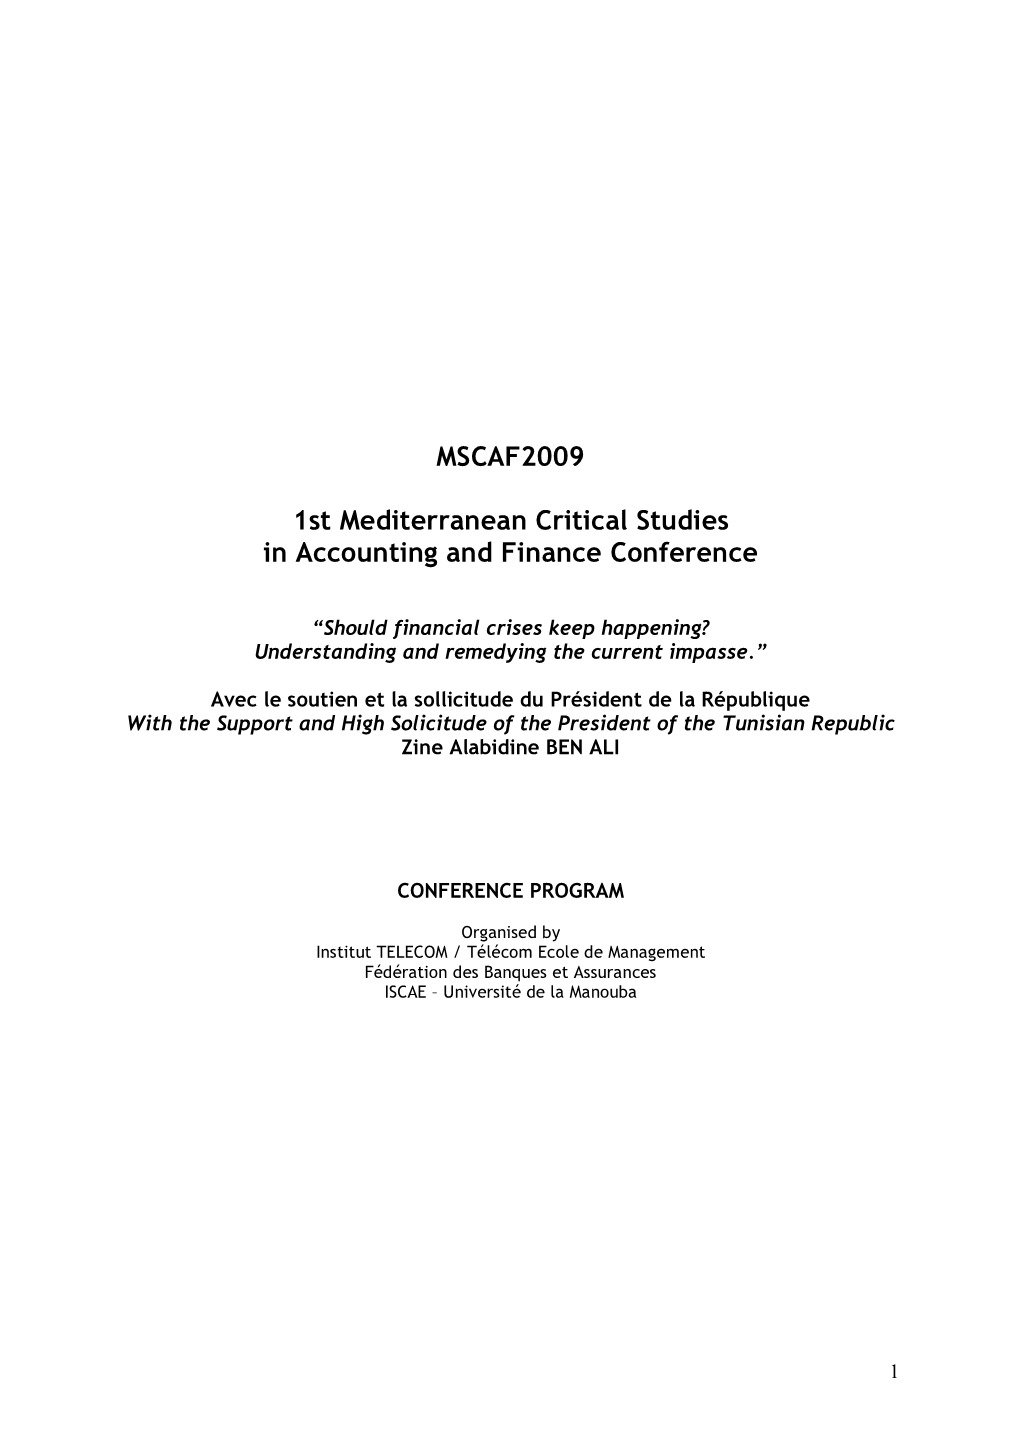 MSCAF2009 1St Mediterranean Critical Studies in Accounting And